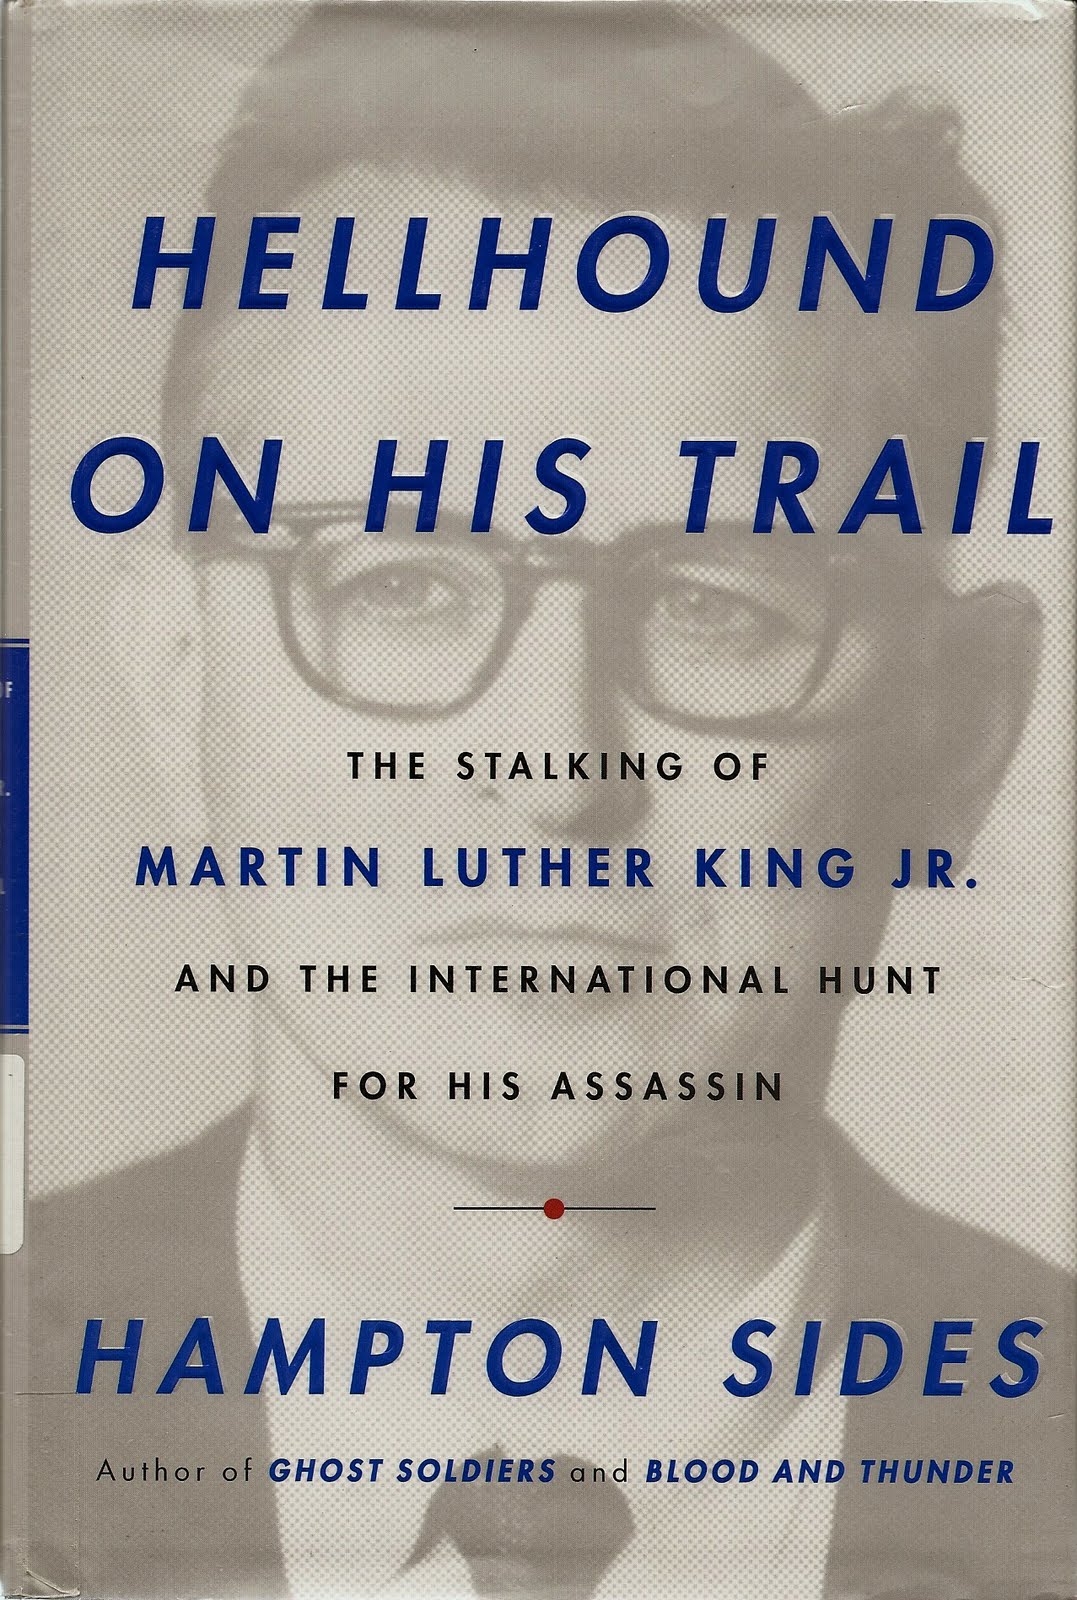 Cover of Hellhound on His Trail by Hampton Sides